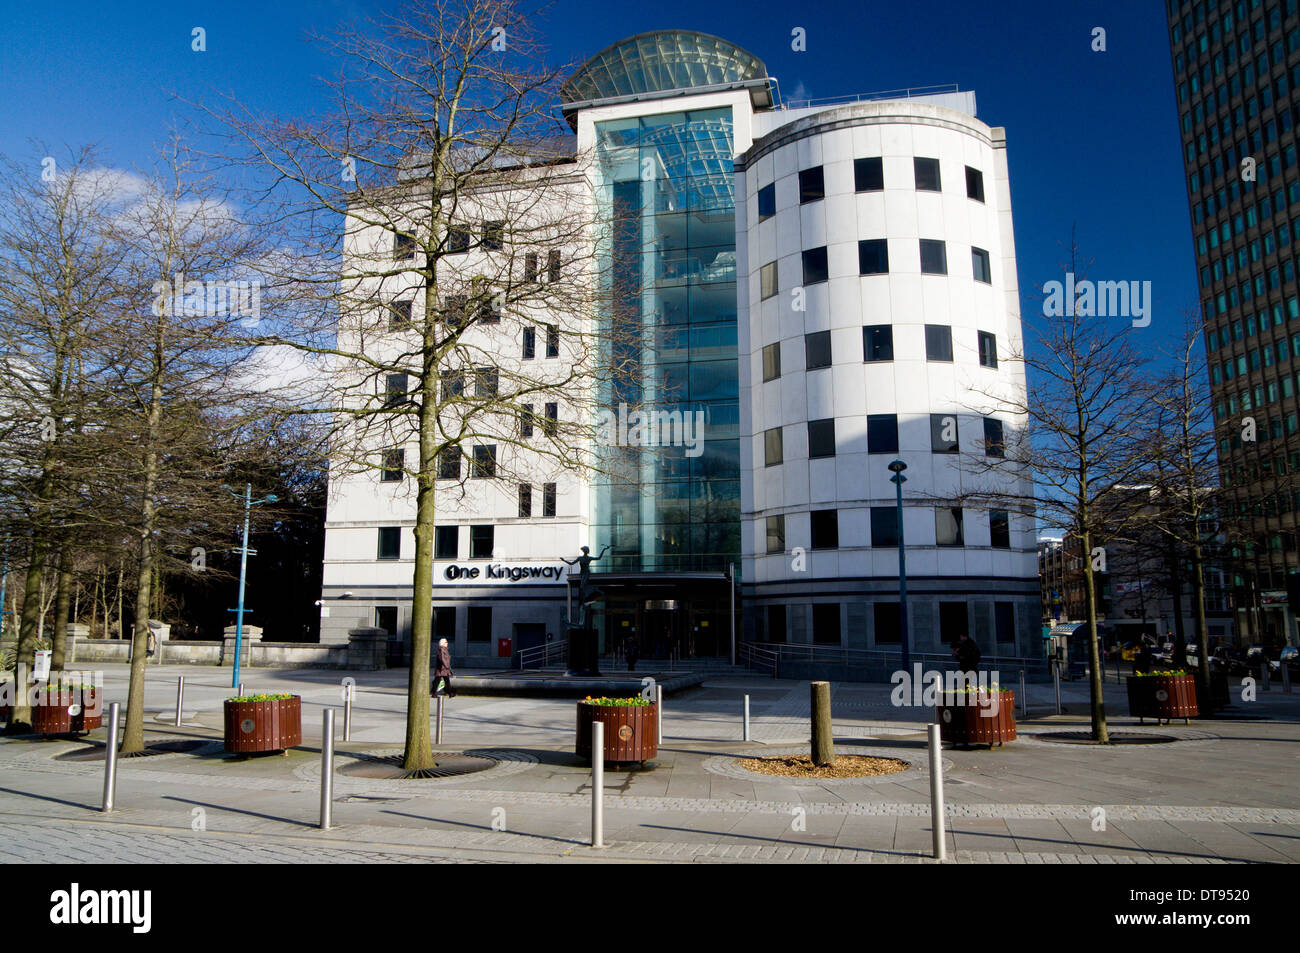 No One Kingsway office building, The Kingsway, Cardiff, Wales. Stock Photo